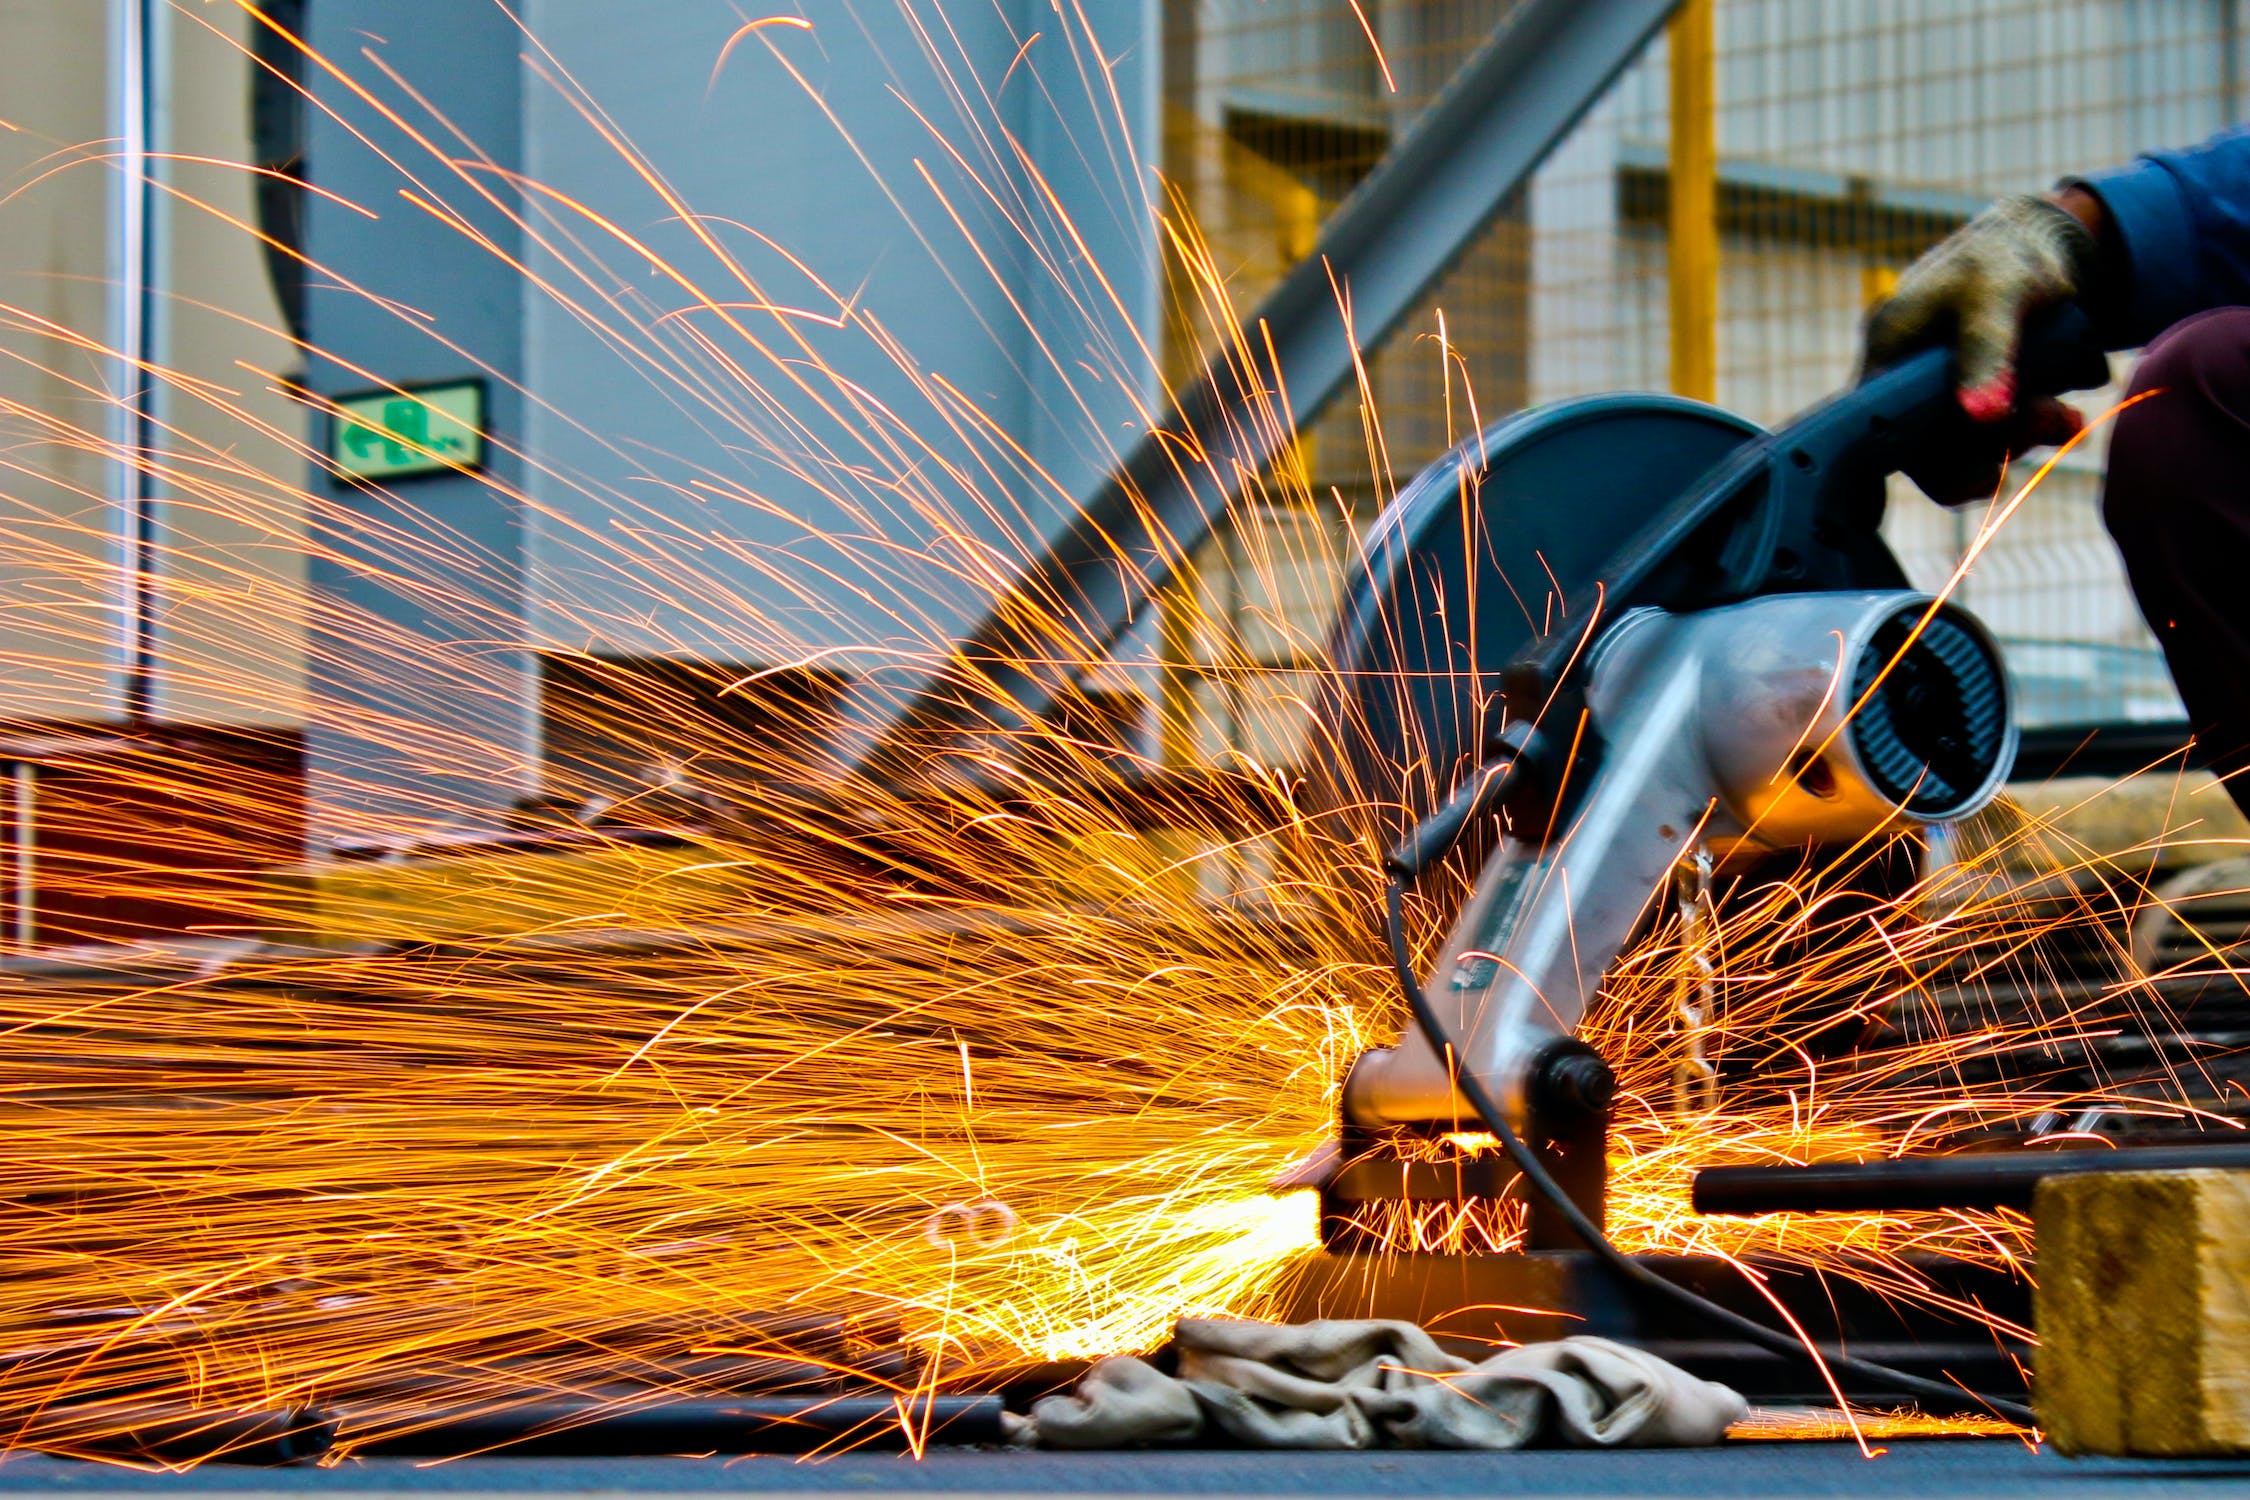 Skilled worker using angle grinder in metal fabrication, showcasing Martin Control's expertise in industrial manufacturing processes.